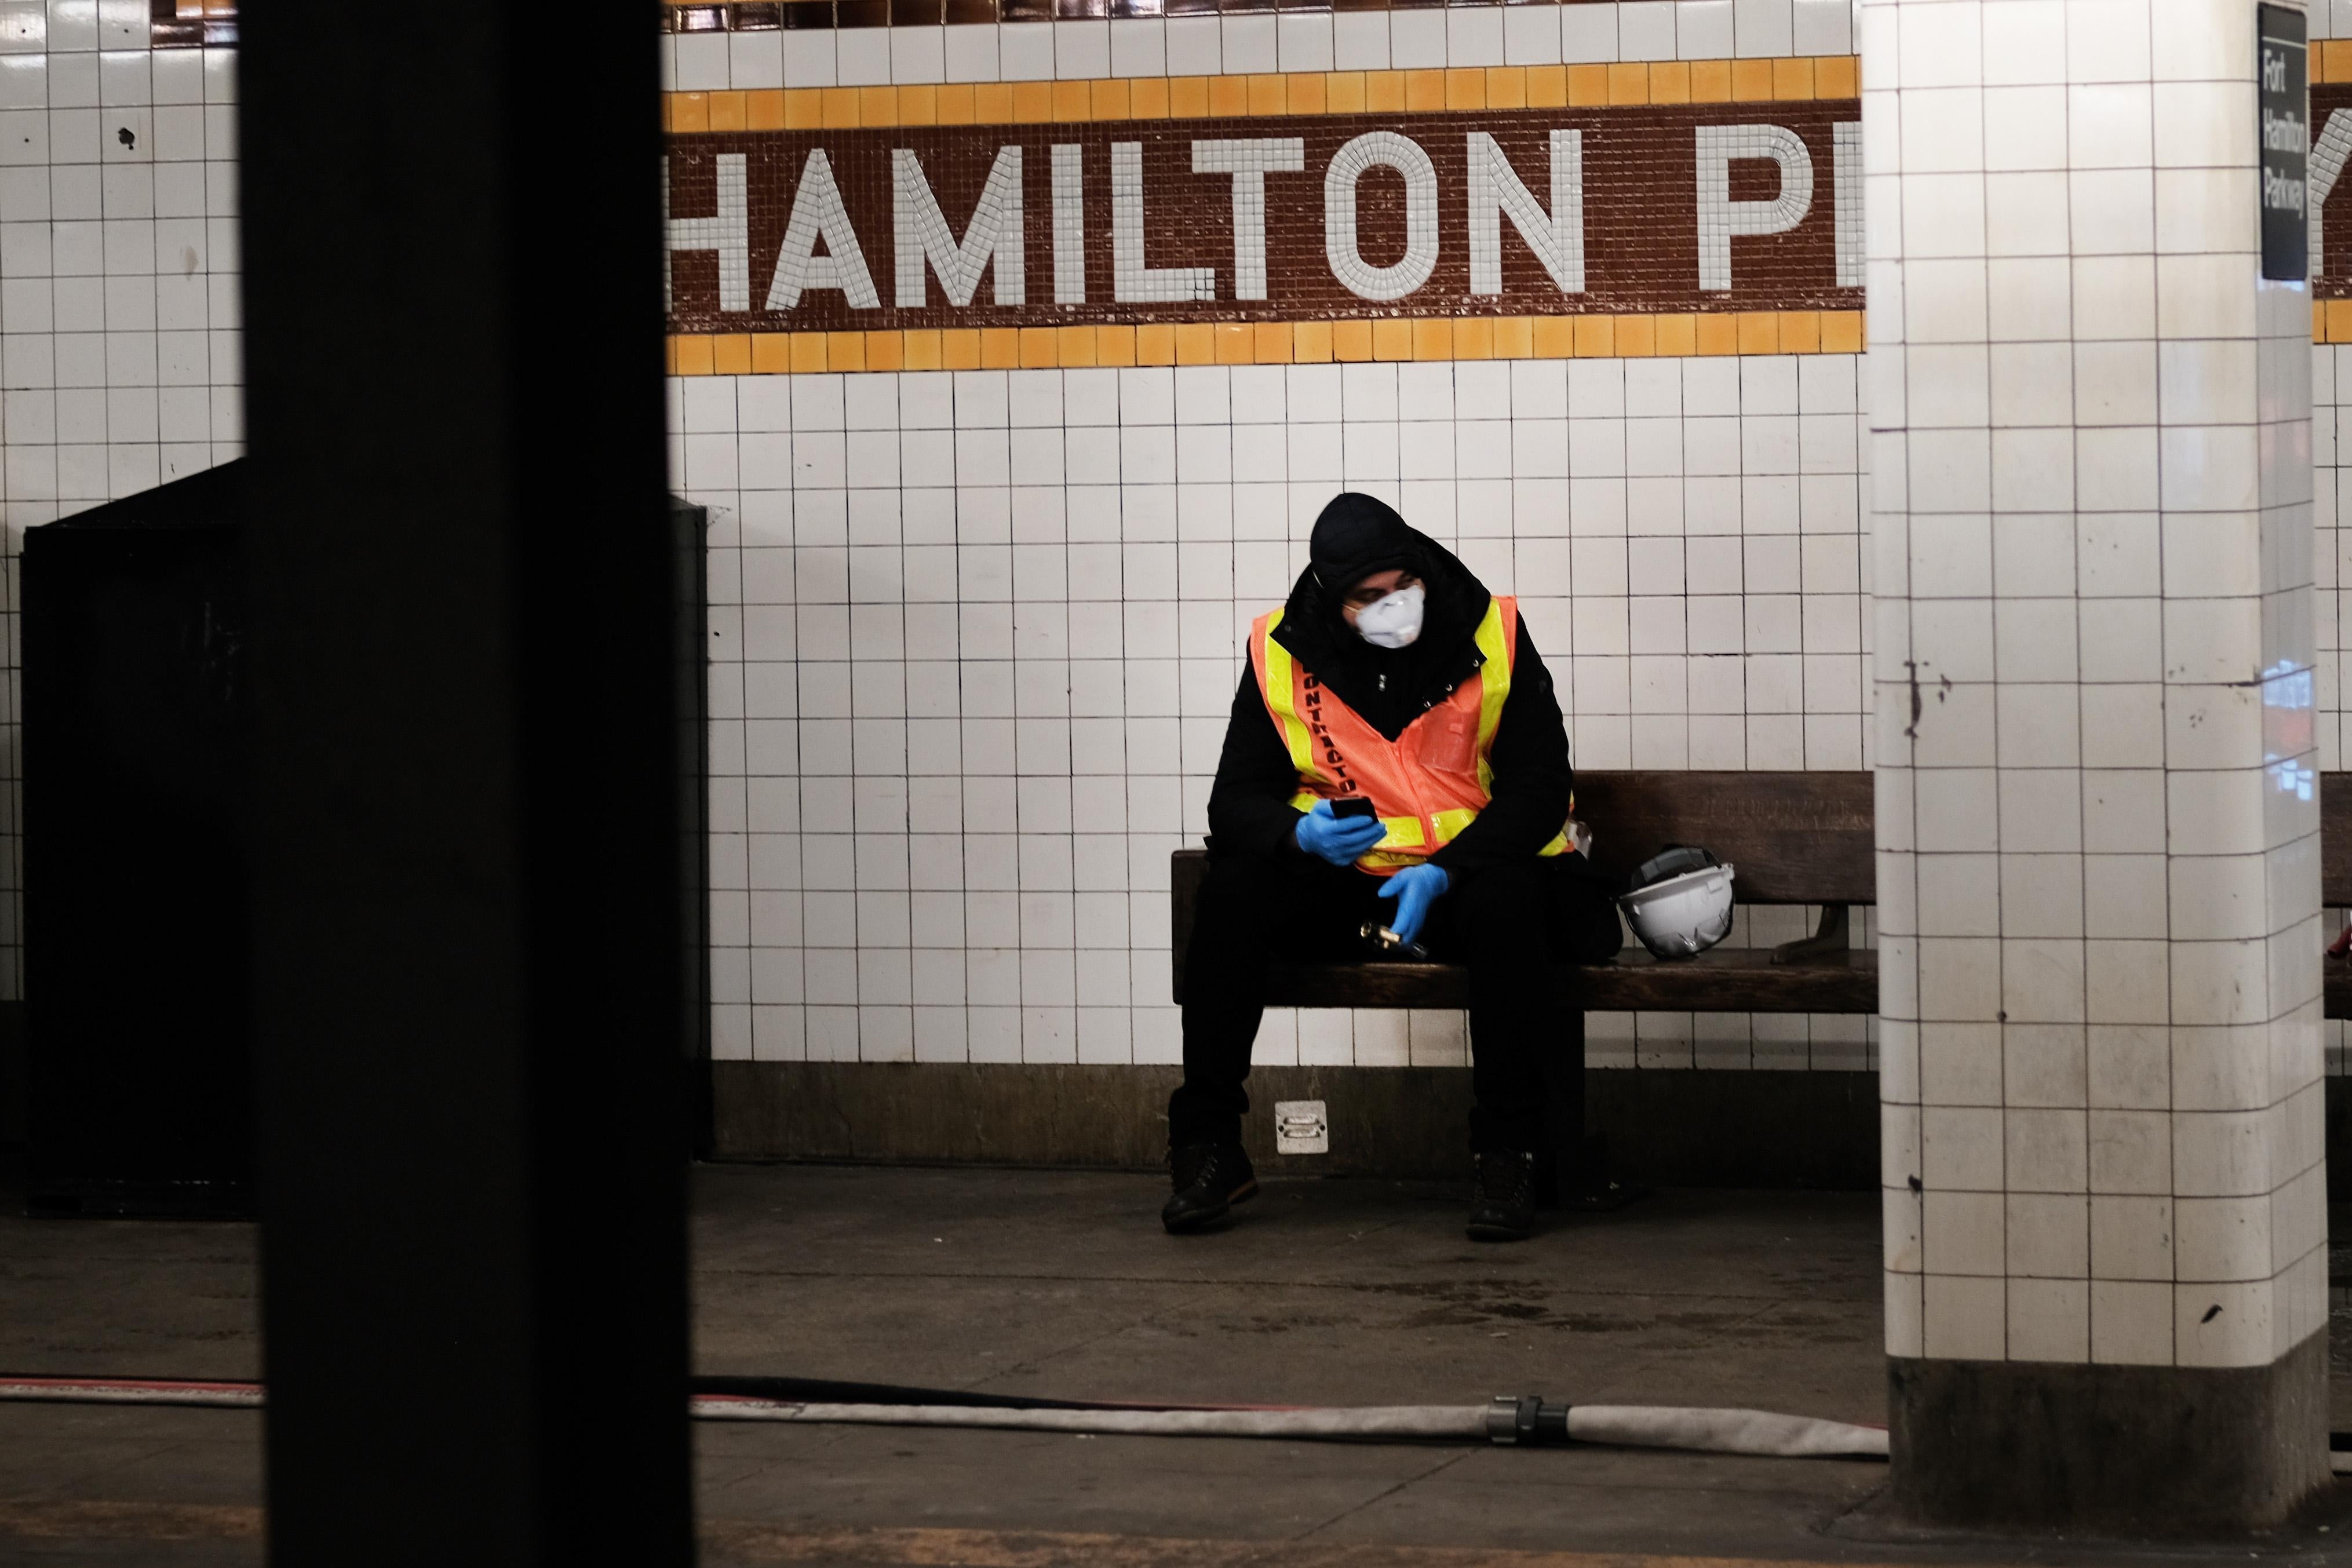 A worker wearing an orange vest and a face mask sits on a bench at a subway station.